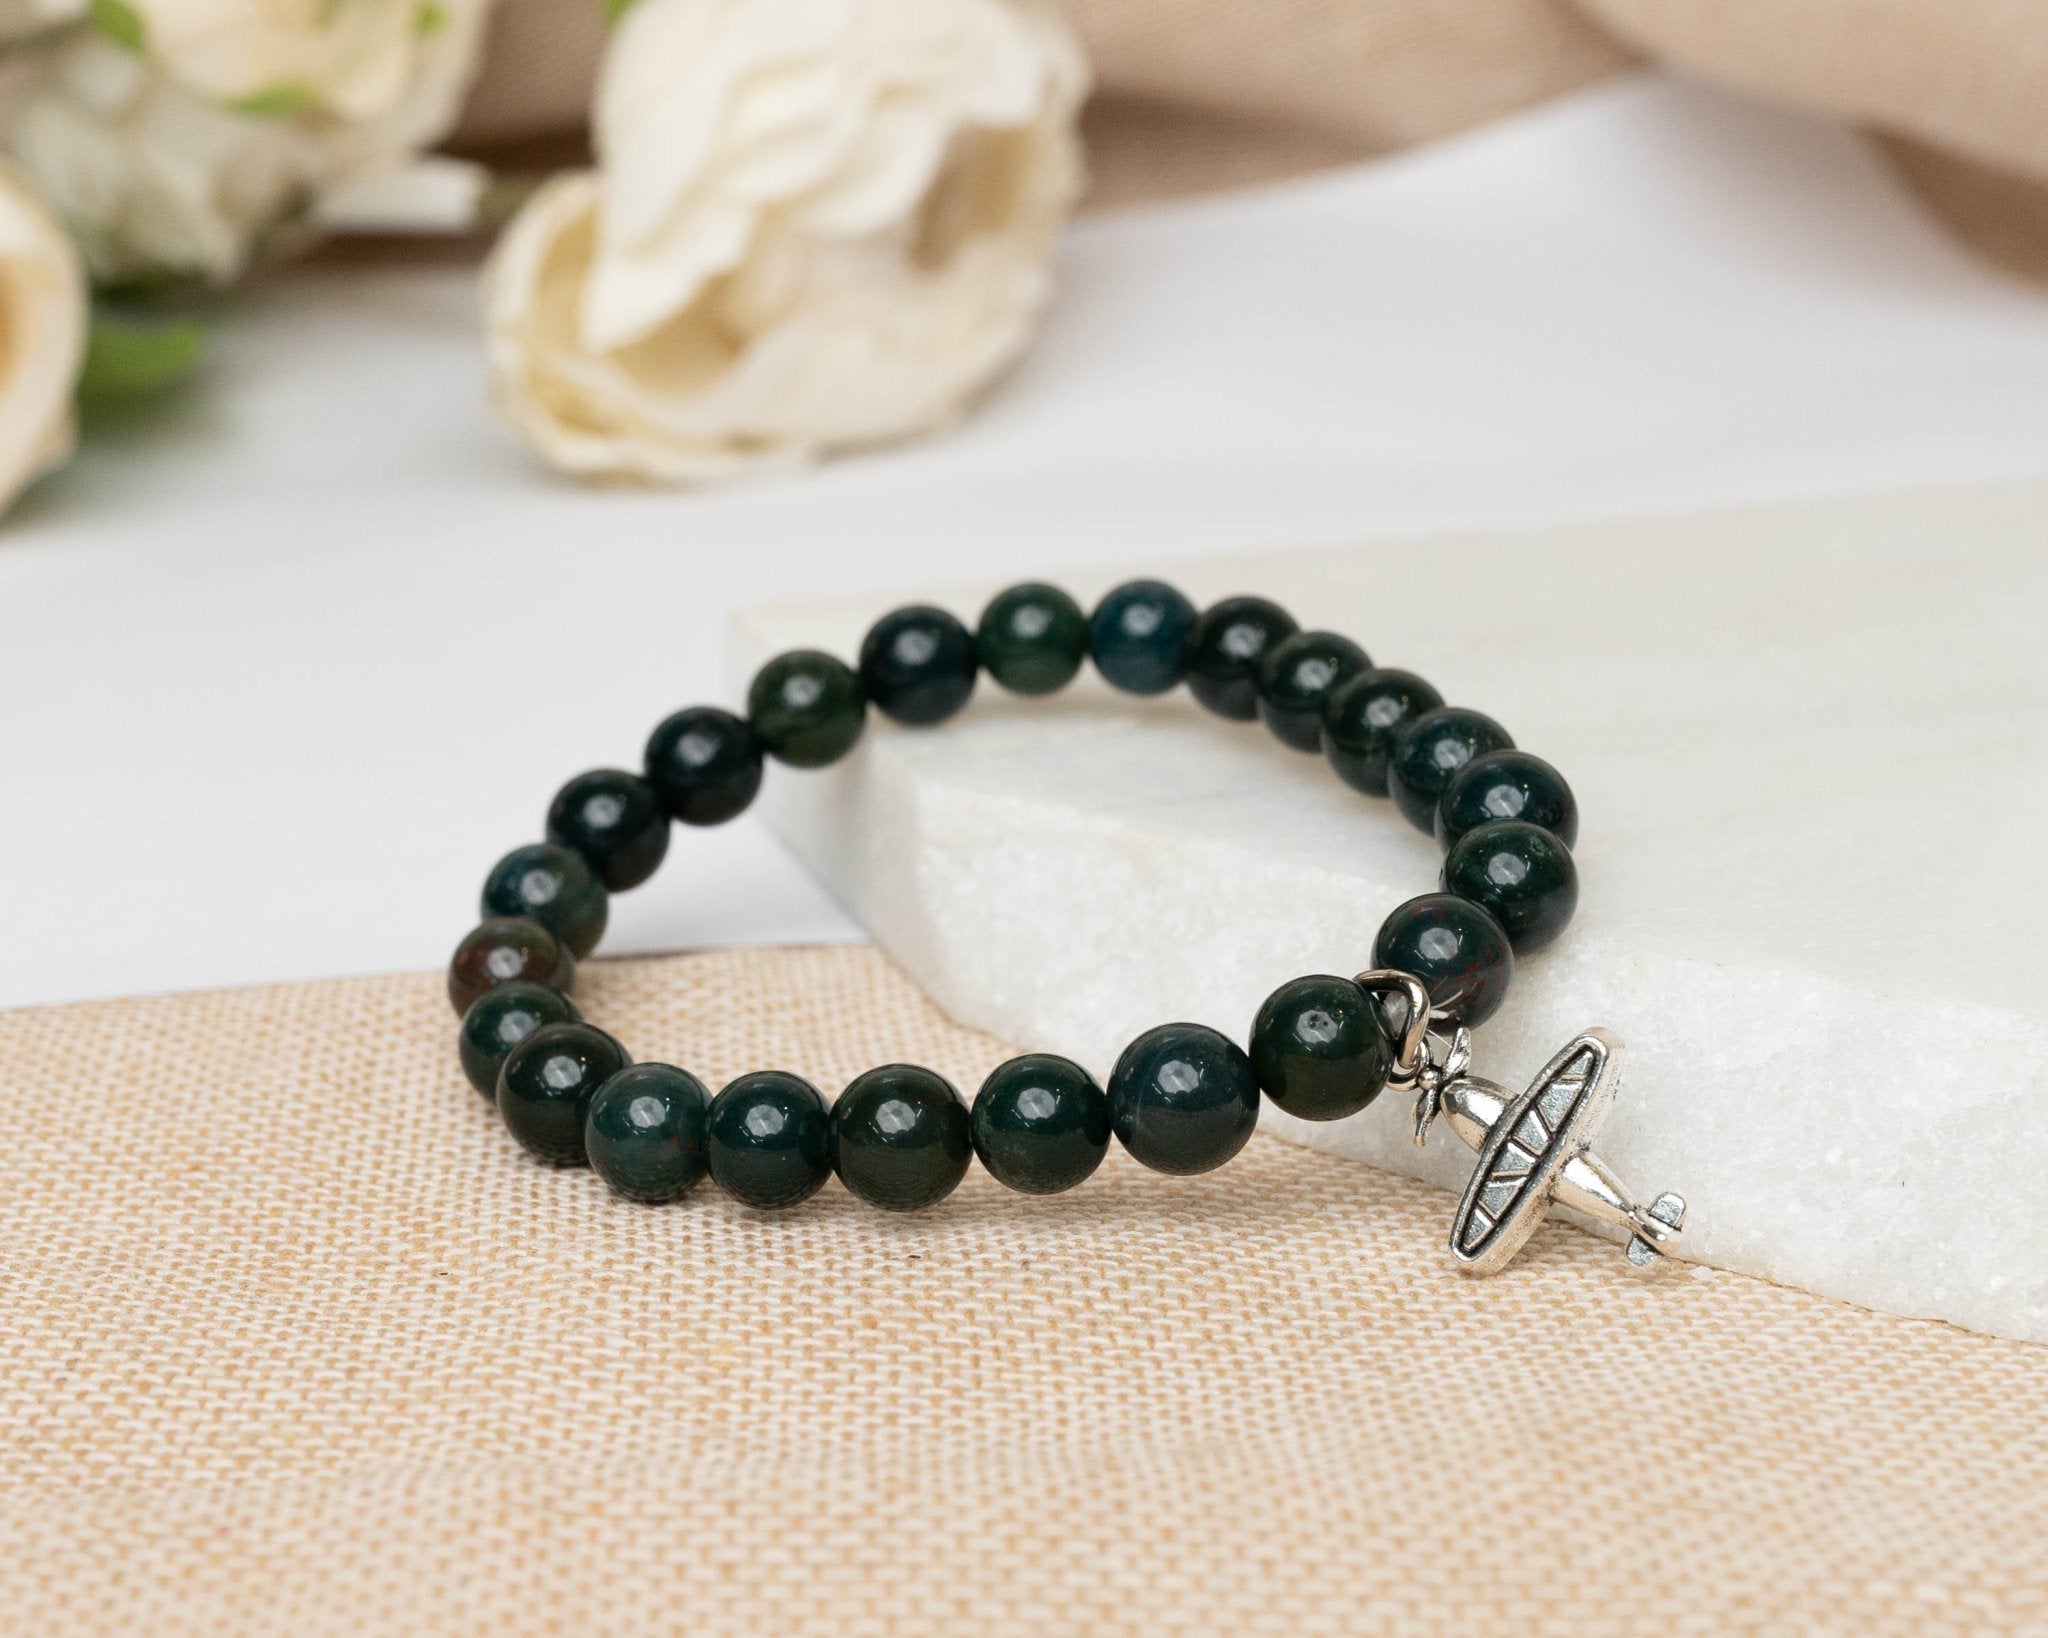 Bloodstone Serenity Bracelet with Aeroplane Charm - Bodh Gem and Crystals